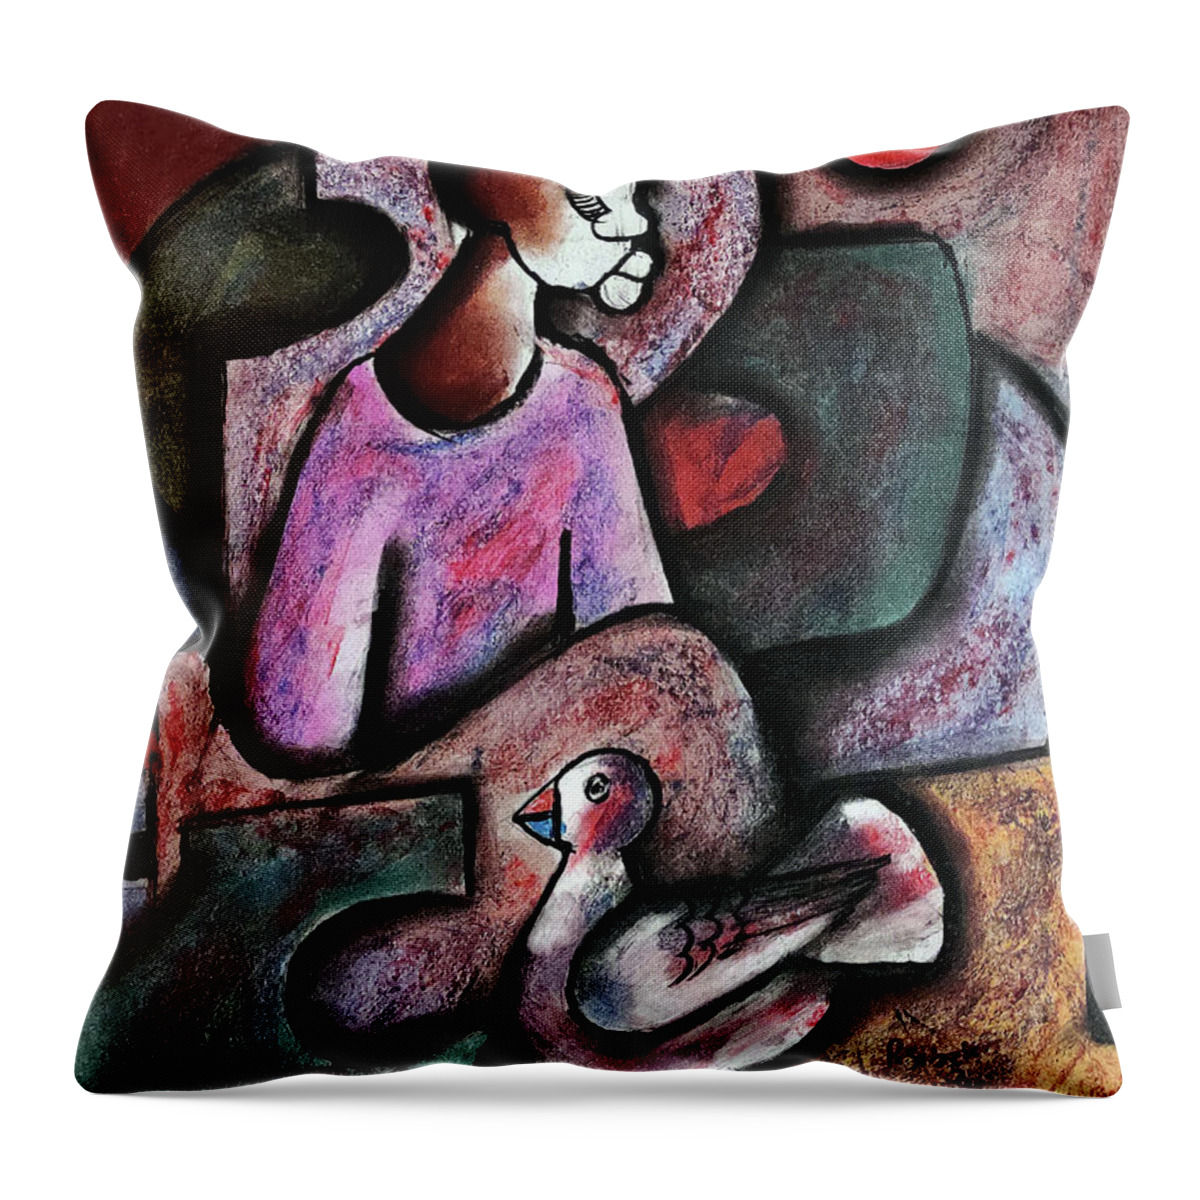 African Art Throw Pillow featuring the painting Dove Of Peace by Peter Sibeko 1940-2013